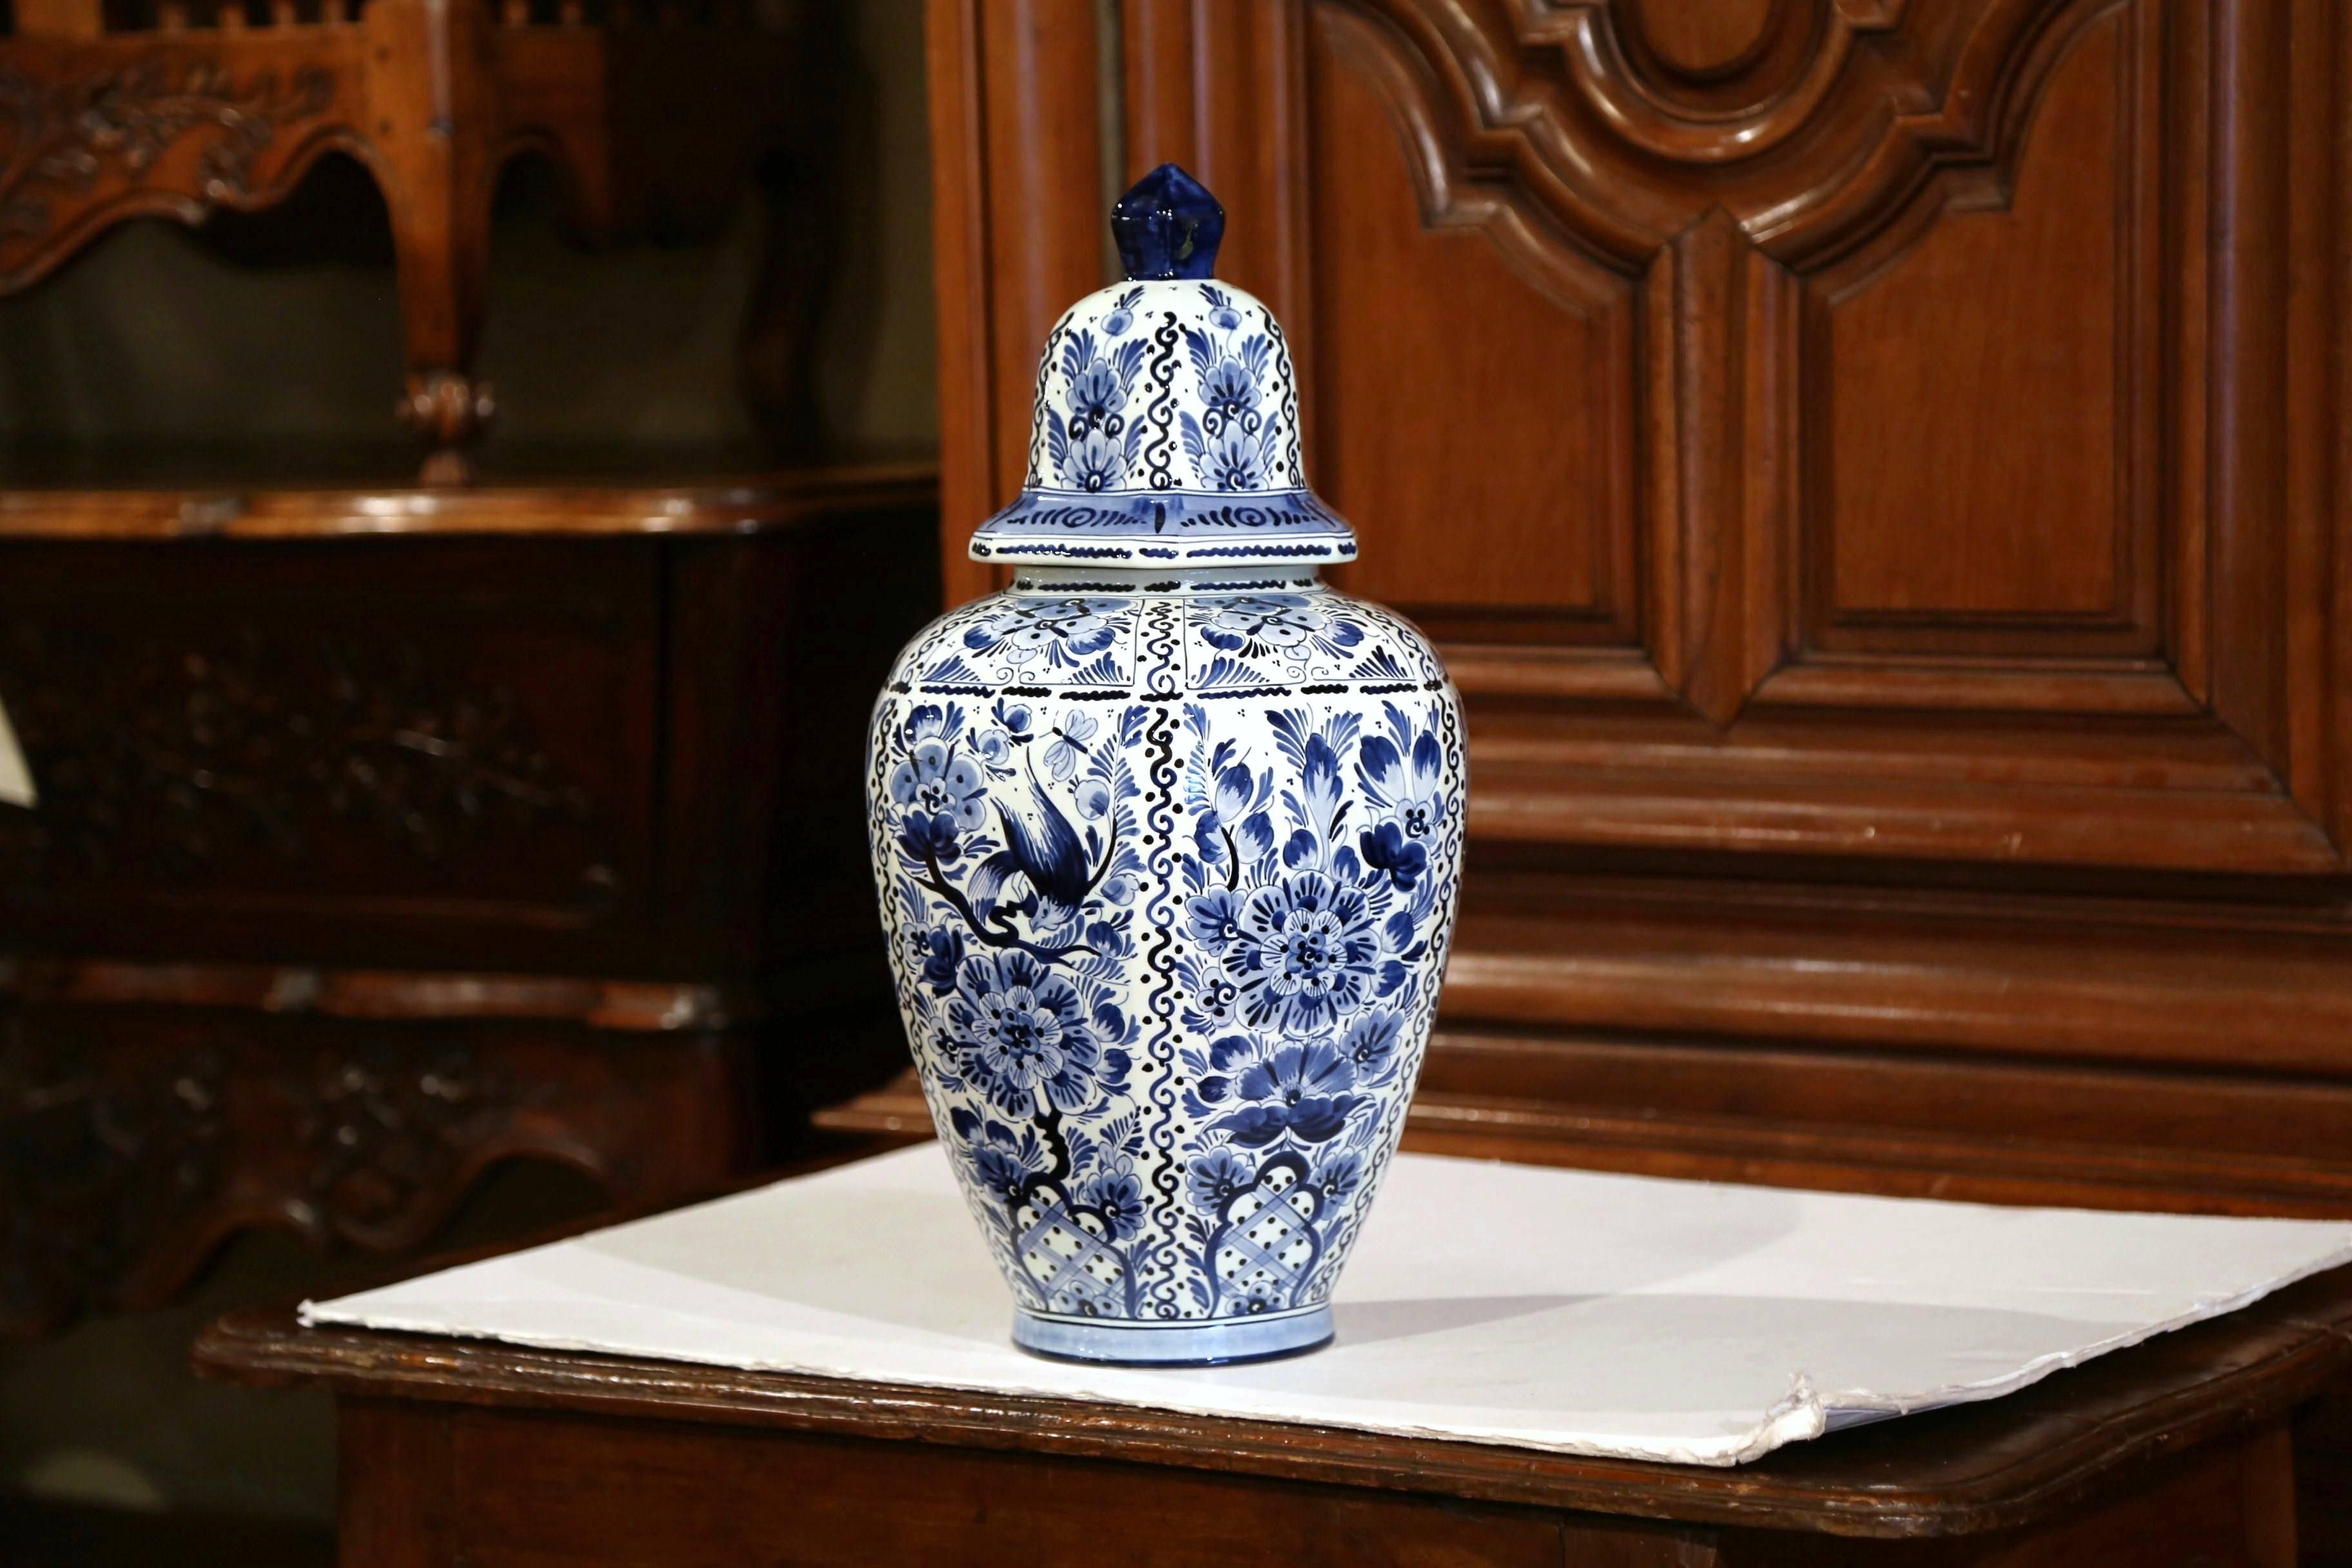 This large and elegant vintage ceramic ginger jar was created in Holland, circa 1950. The mid-century faience potiche features hand-painted Dutch flowers and foliage. The traditional blue and white jars have a dome shaped lid at the top, and are